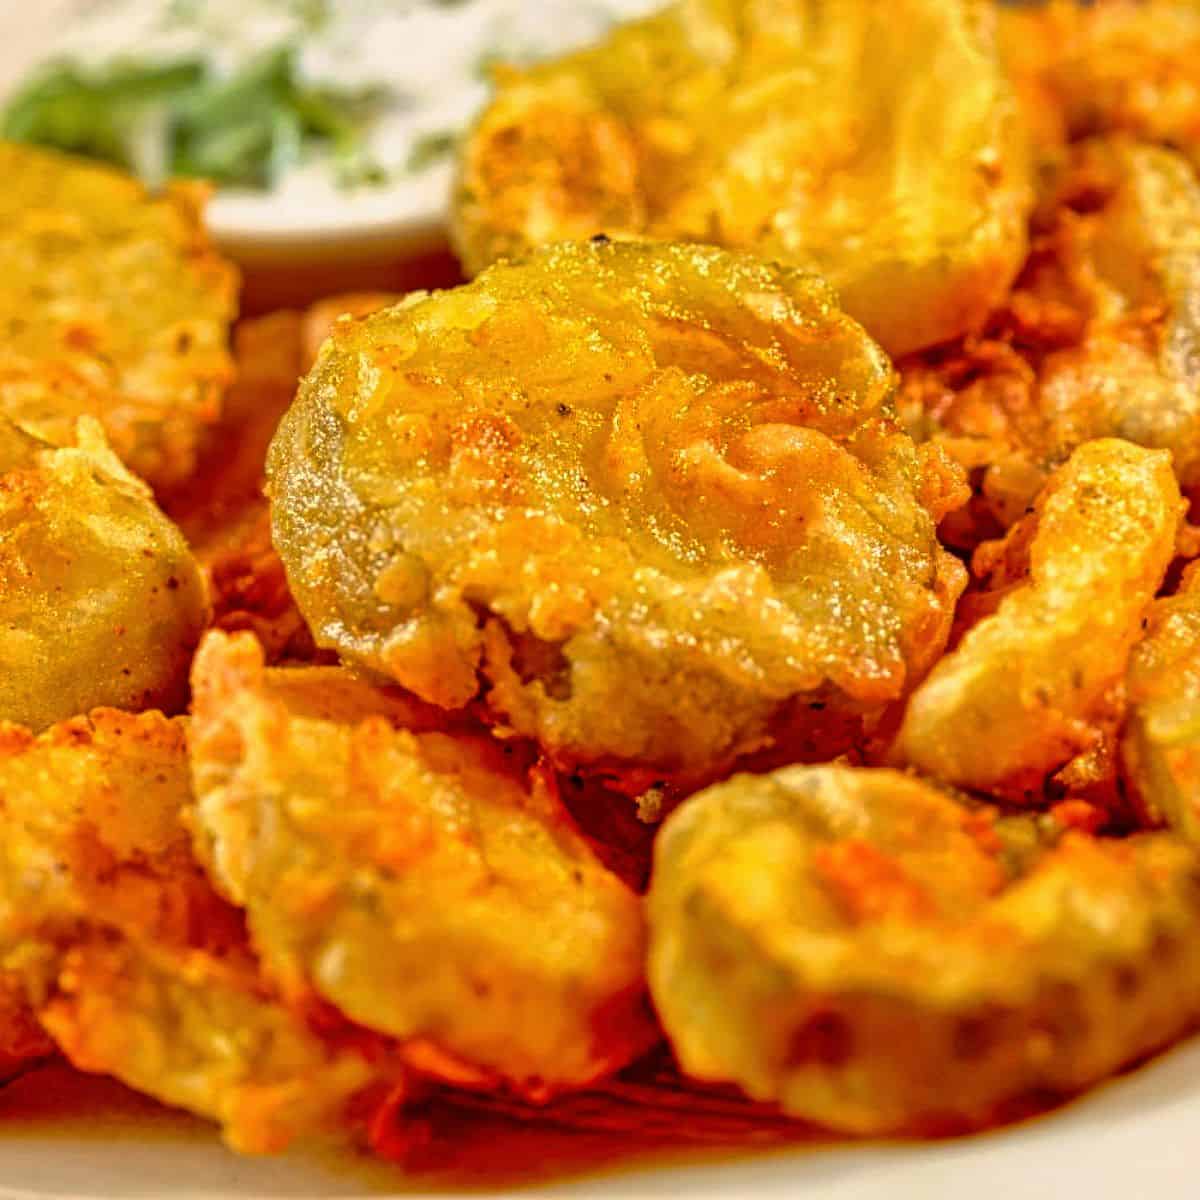 3. Fried Pickles - Airfood Recipe